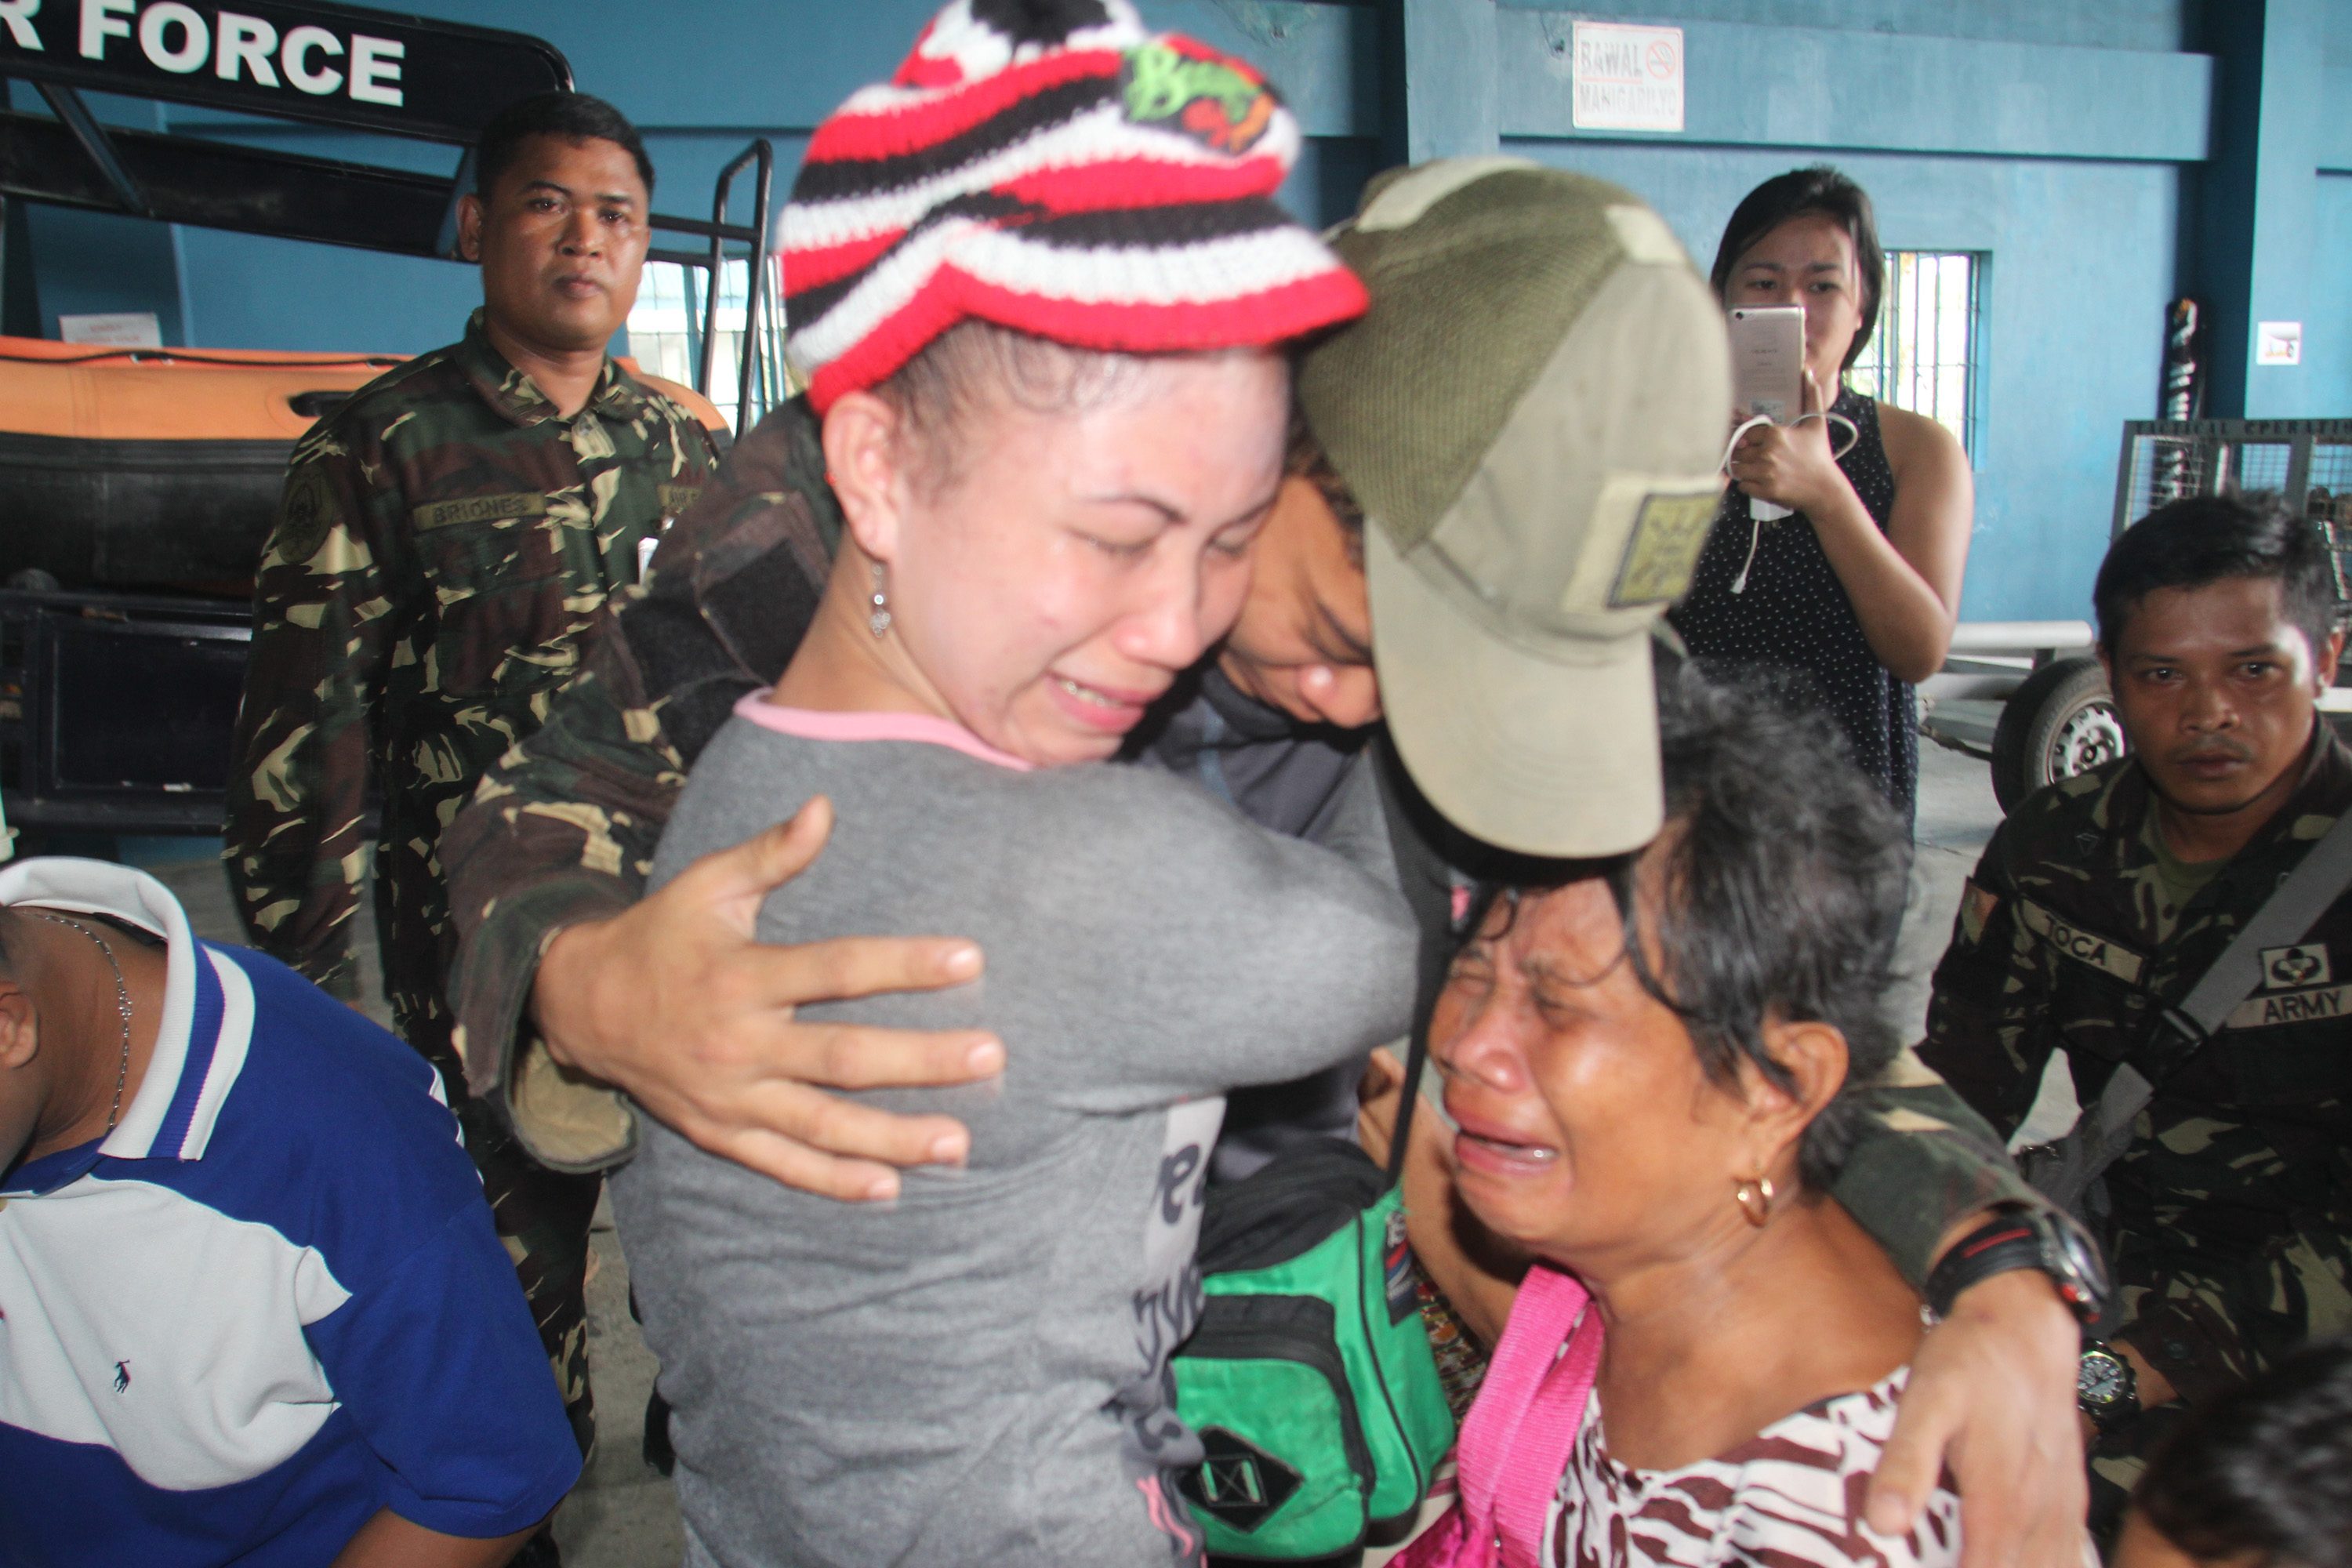 TEARFUL REUNION. Private First Class Rojero Rayco has a tearful reunion with his sister and mother. Photo by Rhaydz Barcia/Rappler  